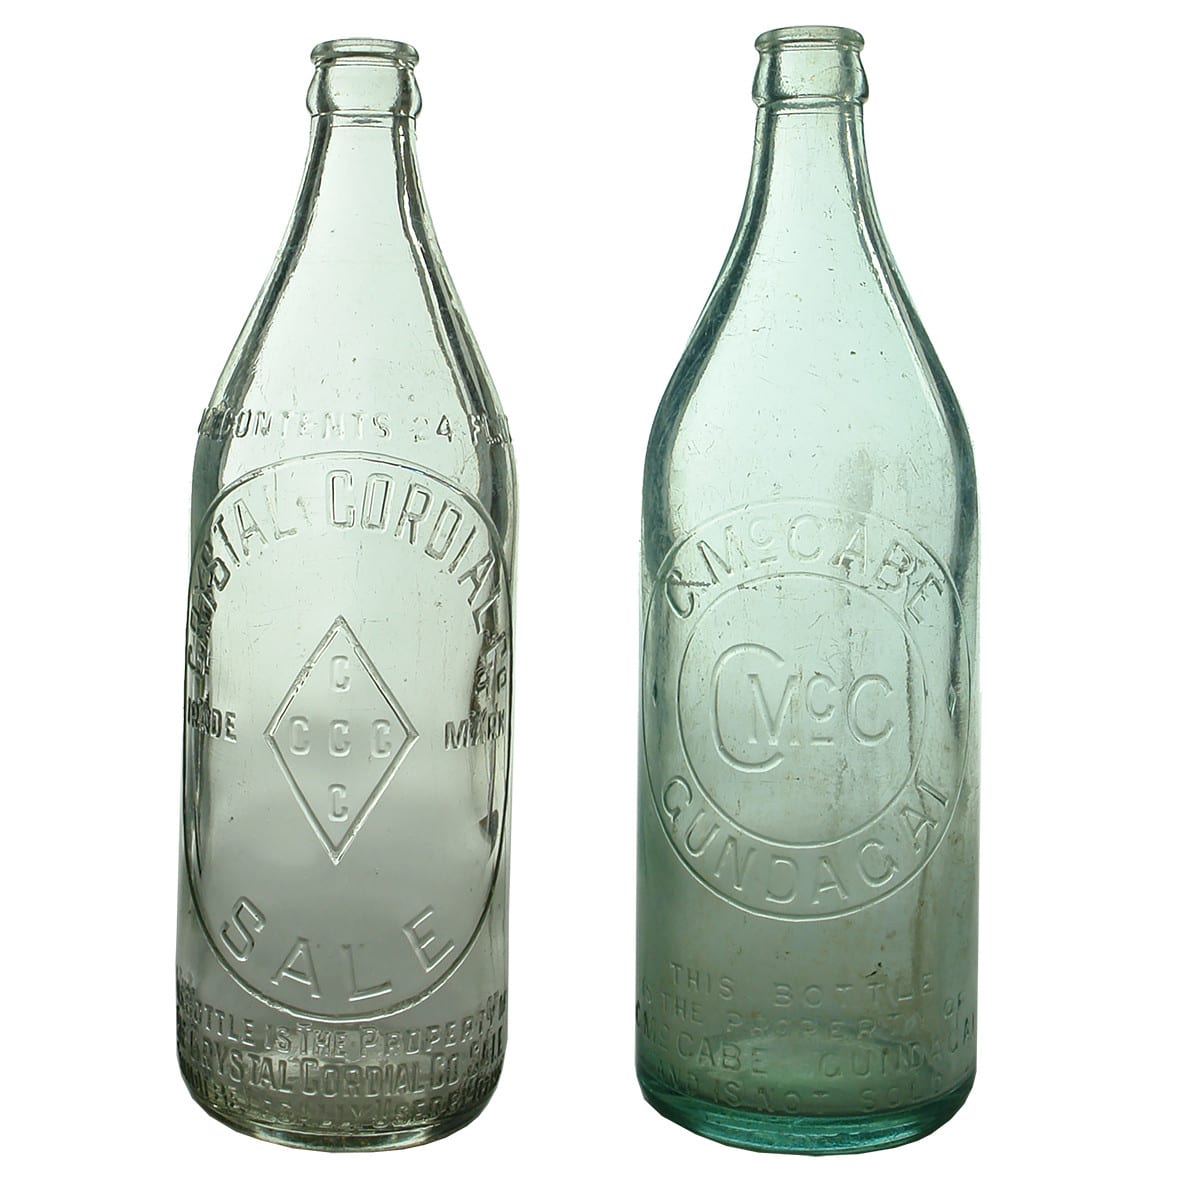 2 24 oz Crown Seals: Crystal Cordial Co., Sale and C. McCabe Gundagai. (Victoria & New South Wales)